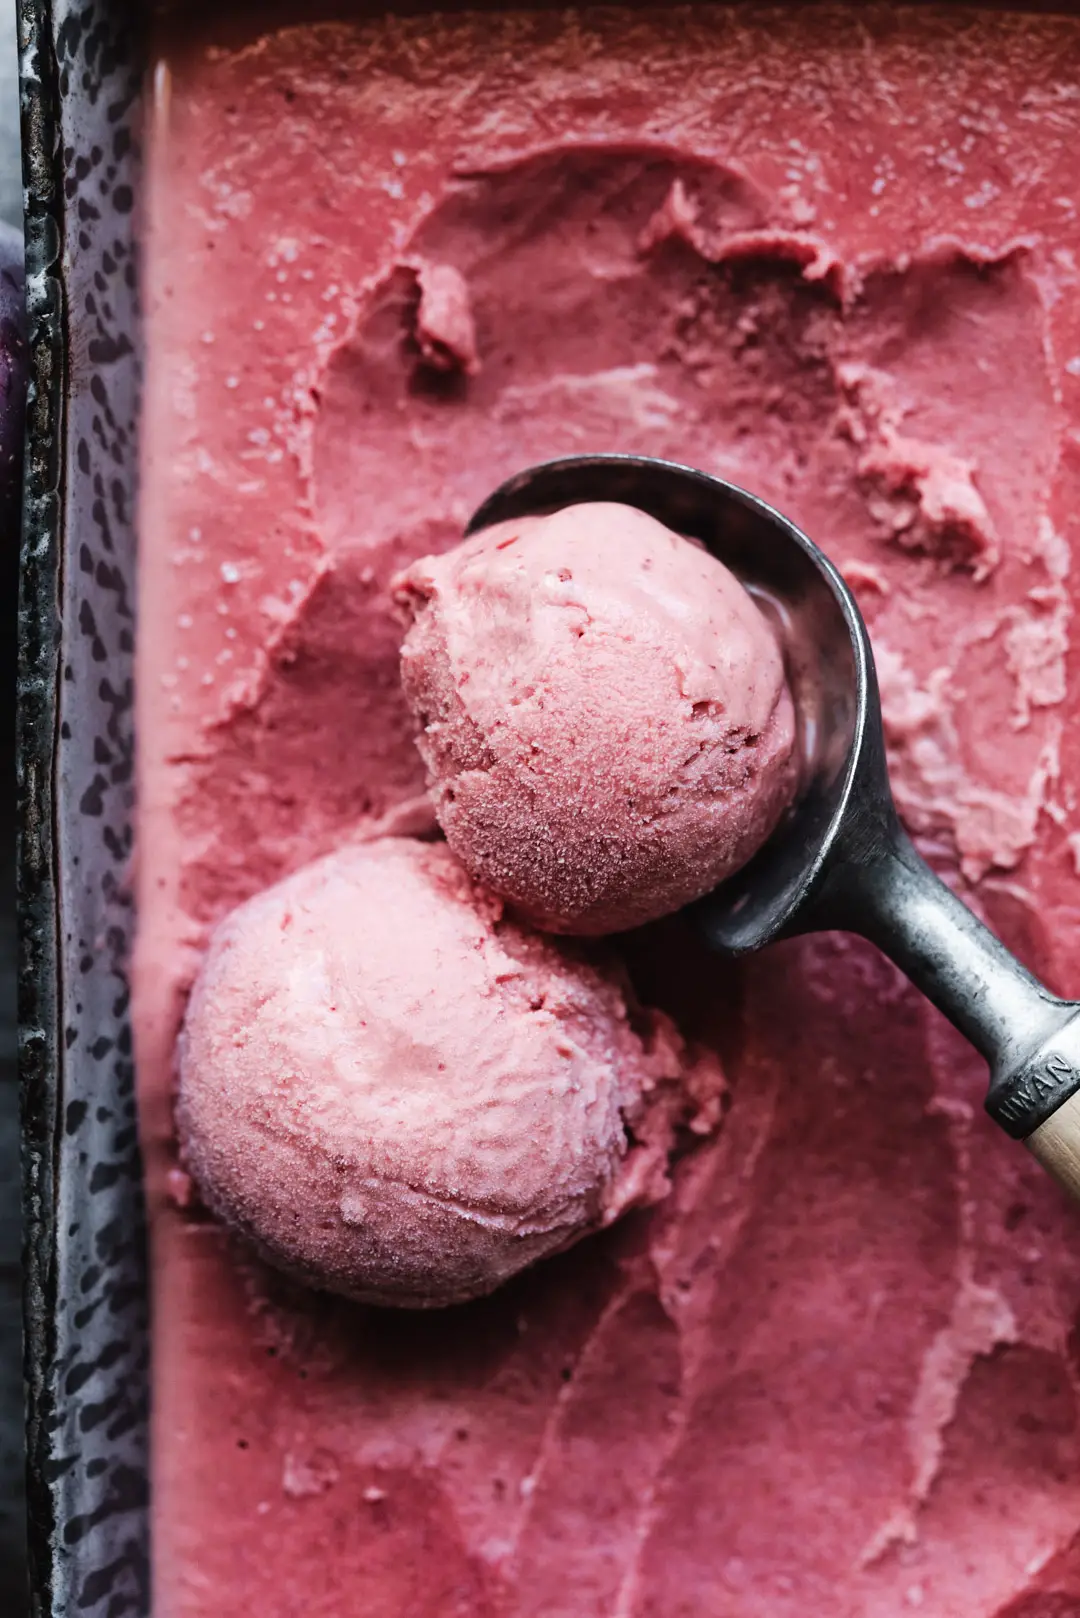 PLUM SHERBET
Not to be mistaken with sorbet, sherbet is a creamy frozen fruit dessert that you should be sure to enjoy this summer! This simple plum version is sweet, slightly tart, perfectly creamy and can be made without an ice cream maker!